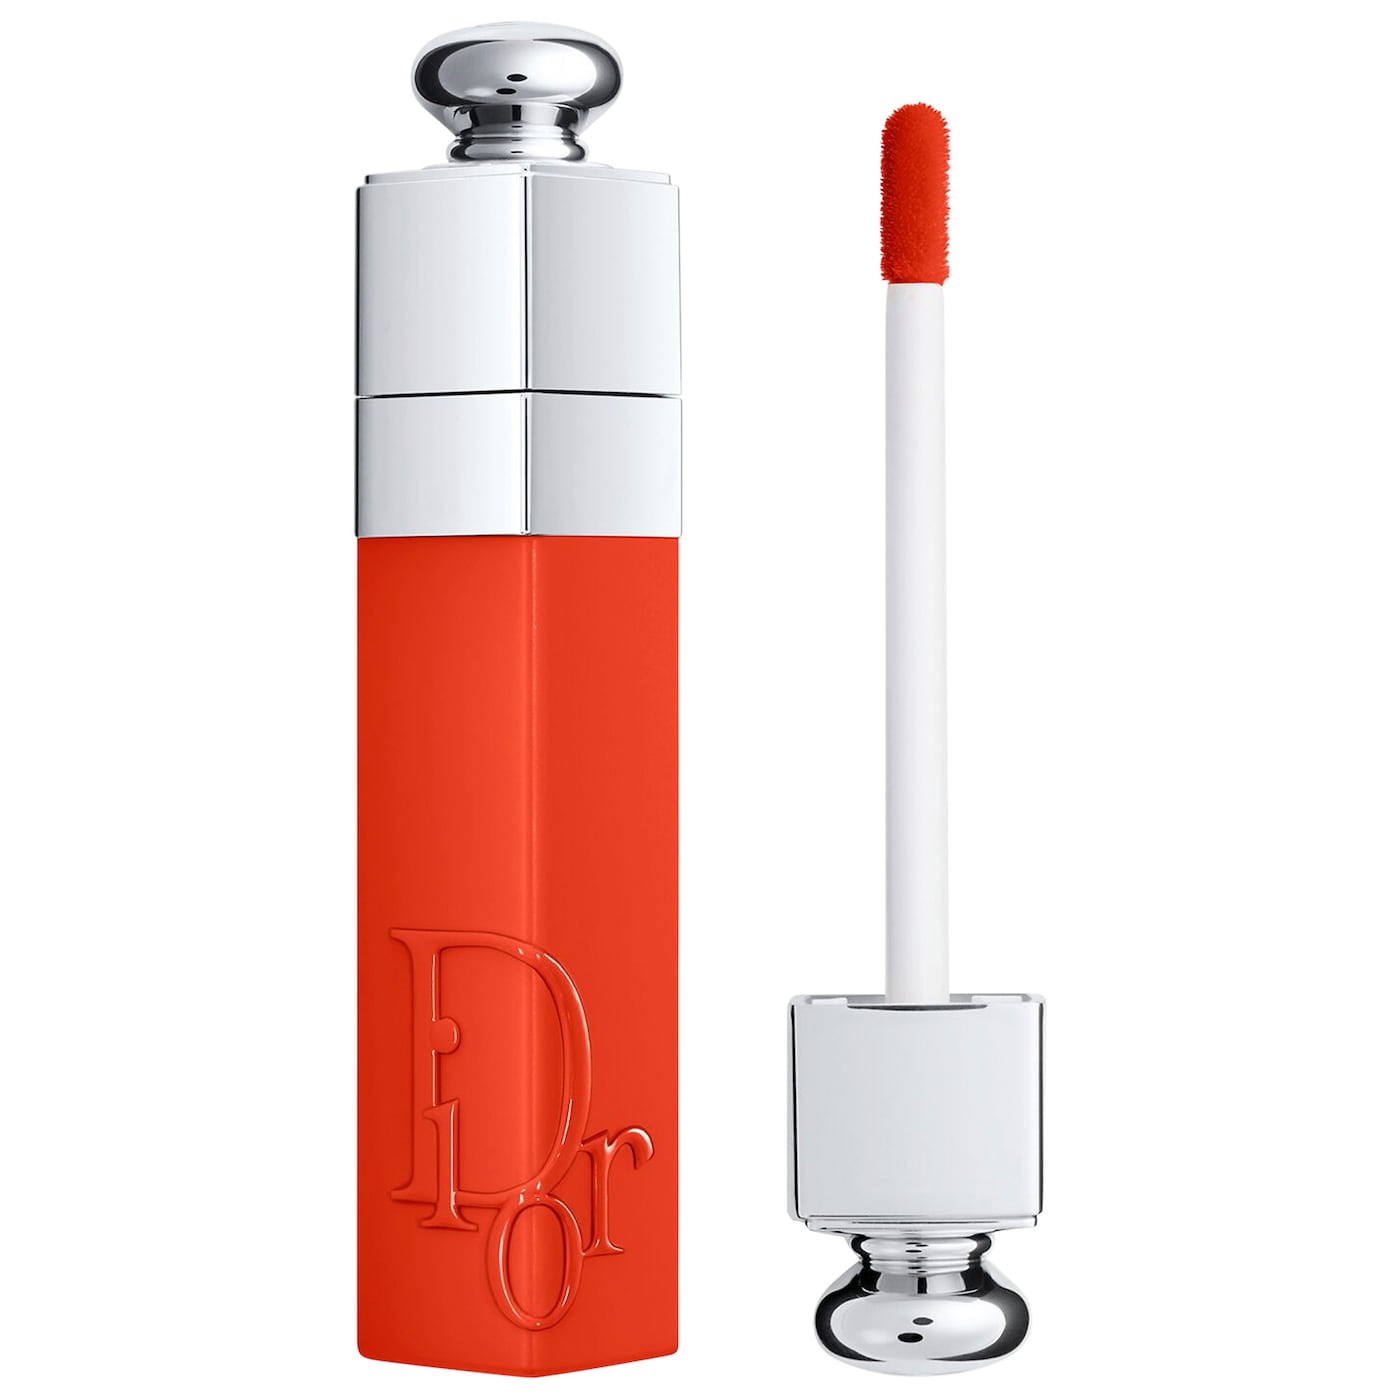 Dior Addict Lip Tint, from our Valentine's Day gift guide